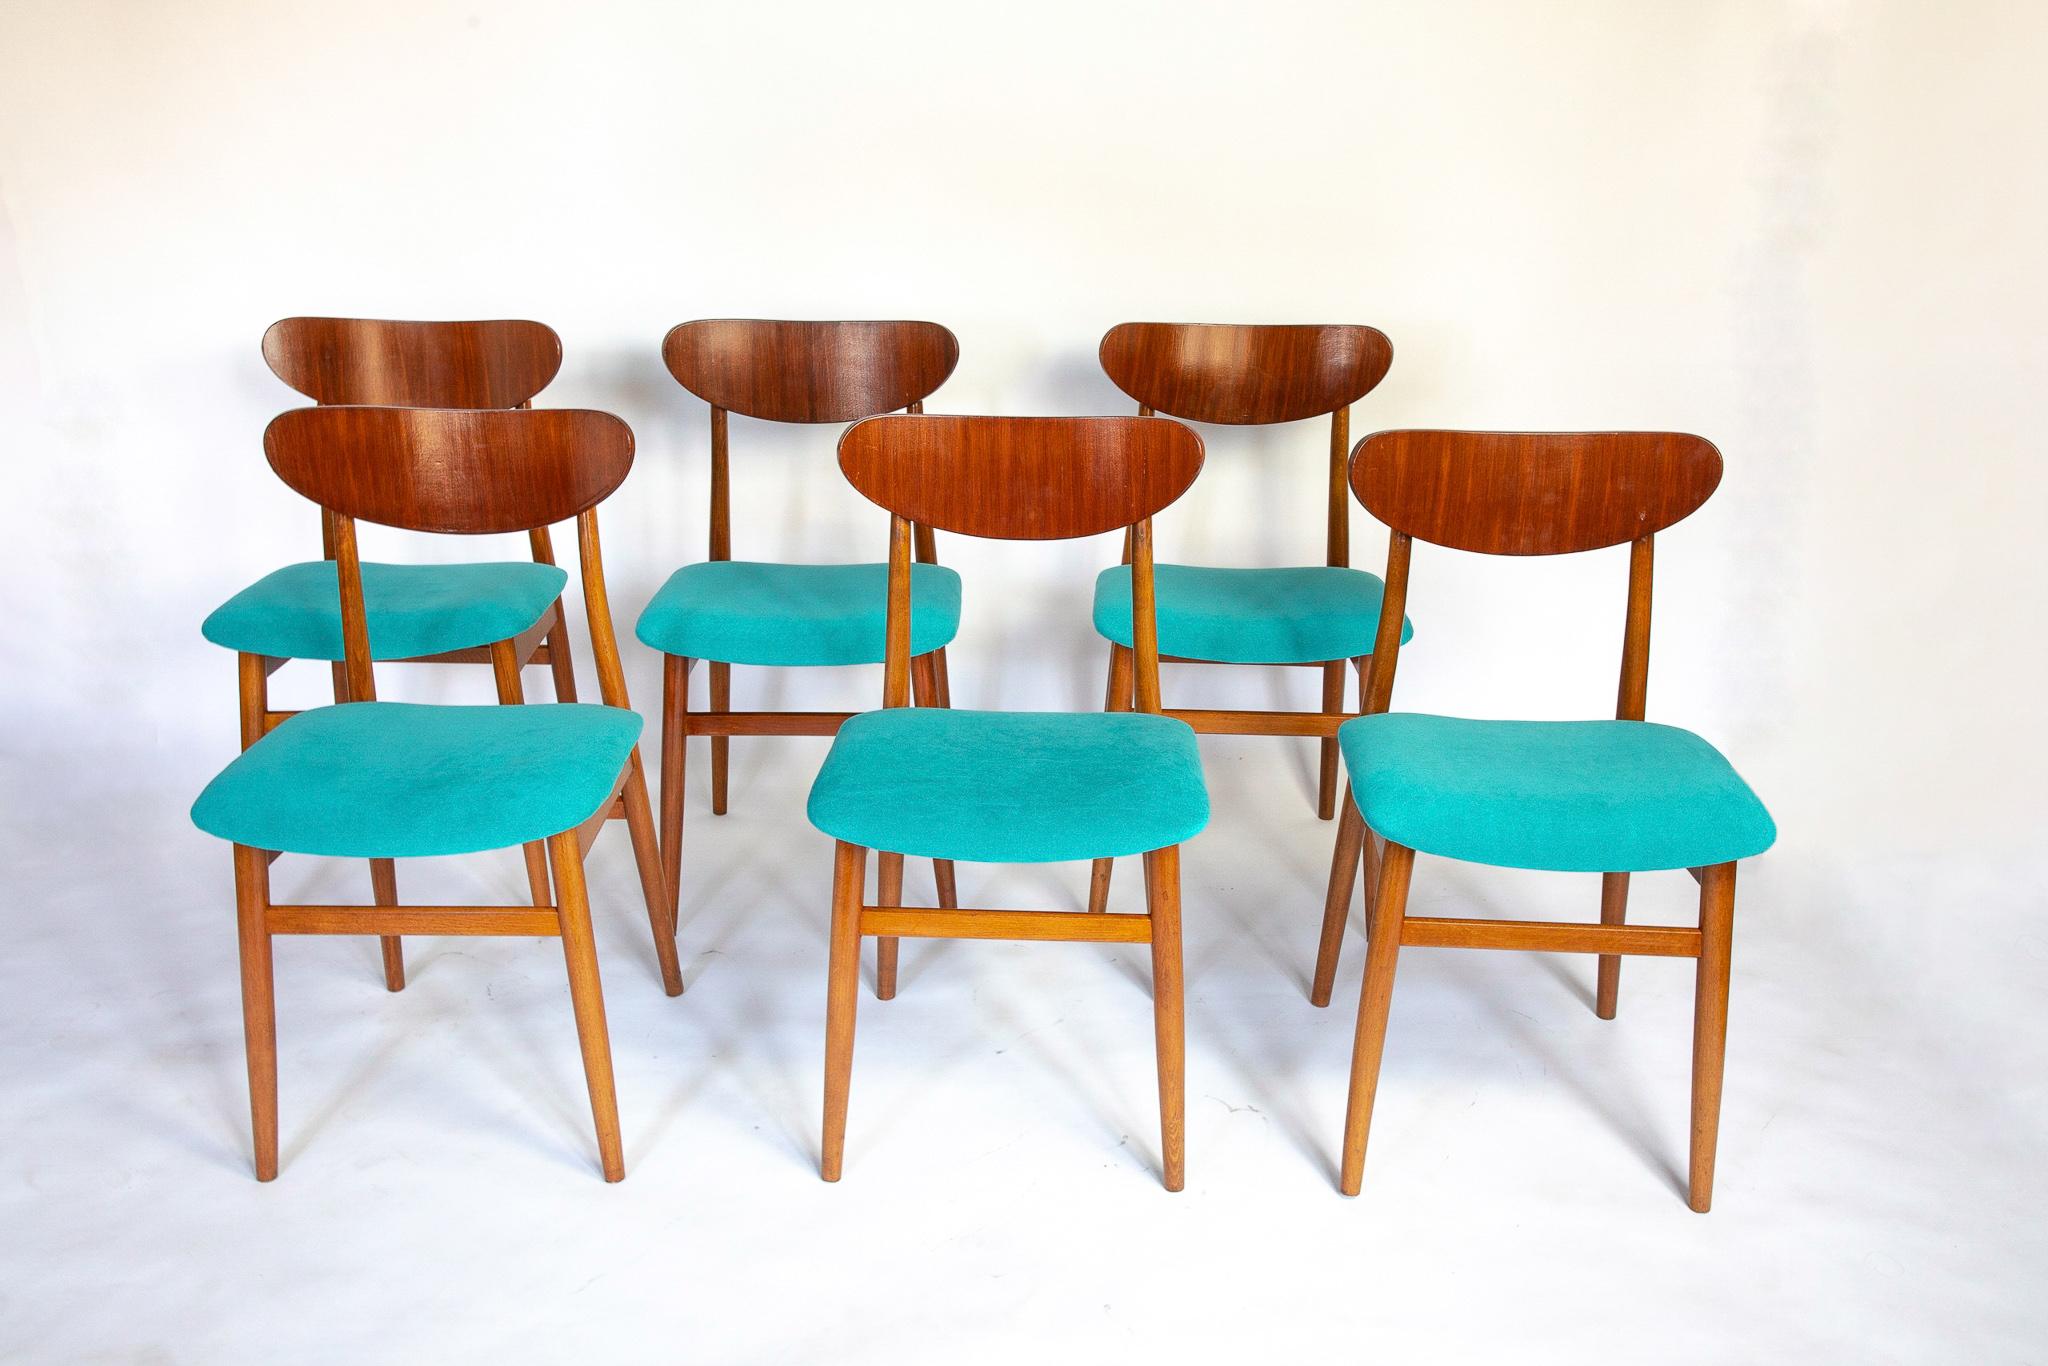 Mid Century Modern dining chairs with blue velvet upholstery, Set of 6, 1950s

This set of six Mid-Century Modern wooden dining chairs adds a subtle elegance to every dining room. Their vibrant blue upholstery is in perfect condition and offers soft